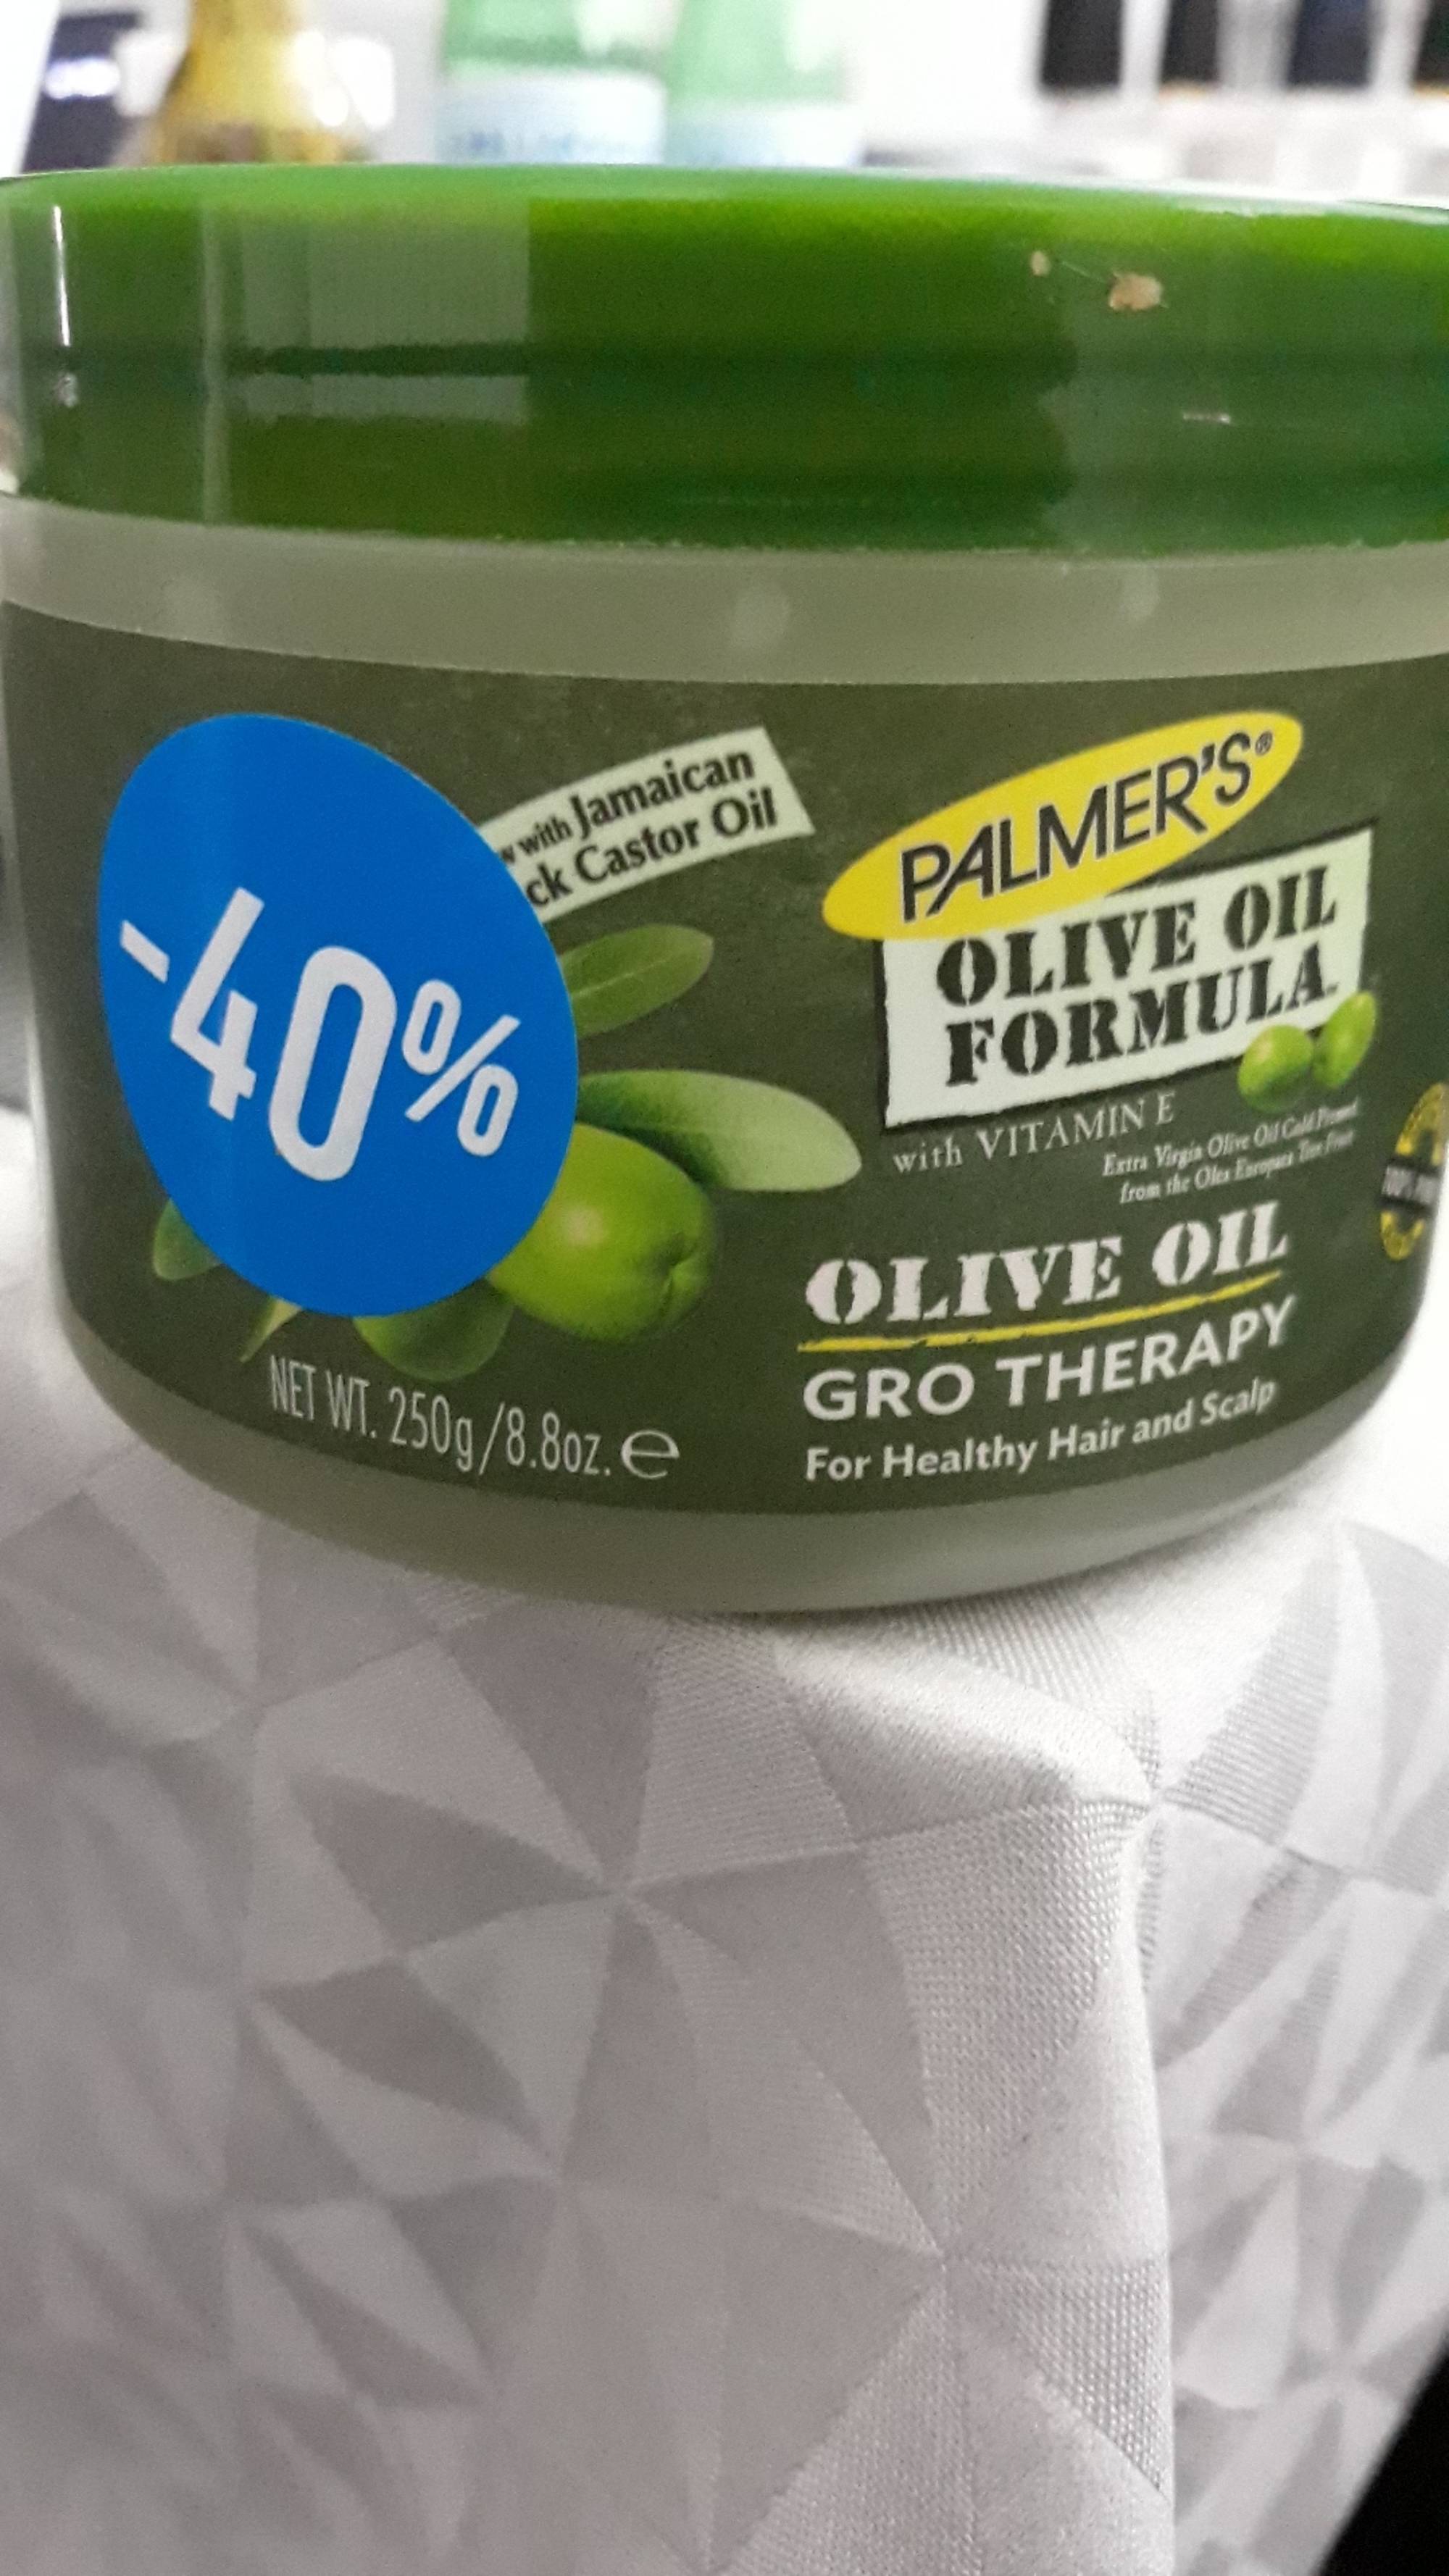 PALMER'S - Olive oil formula - Gro therapy for healthy hair and scalp